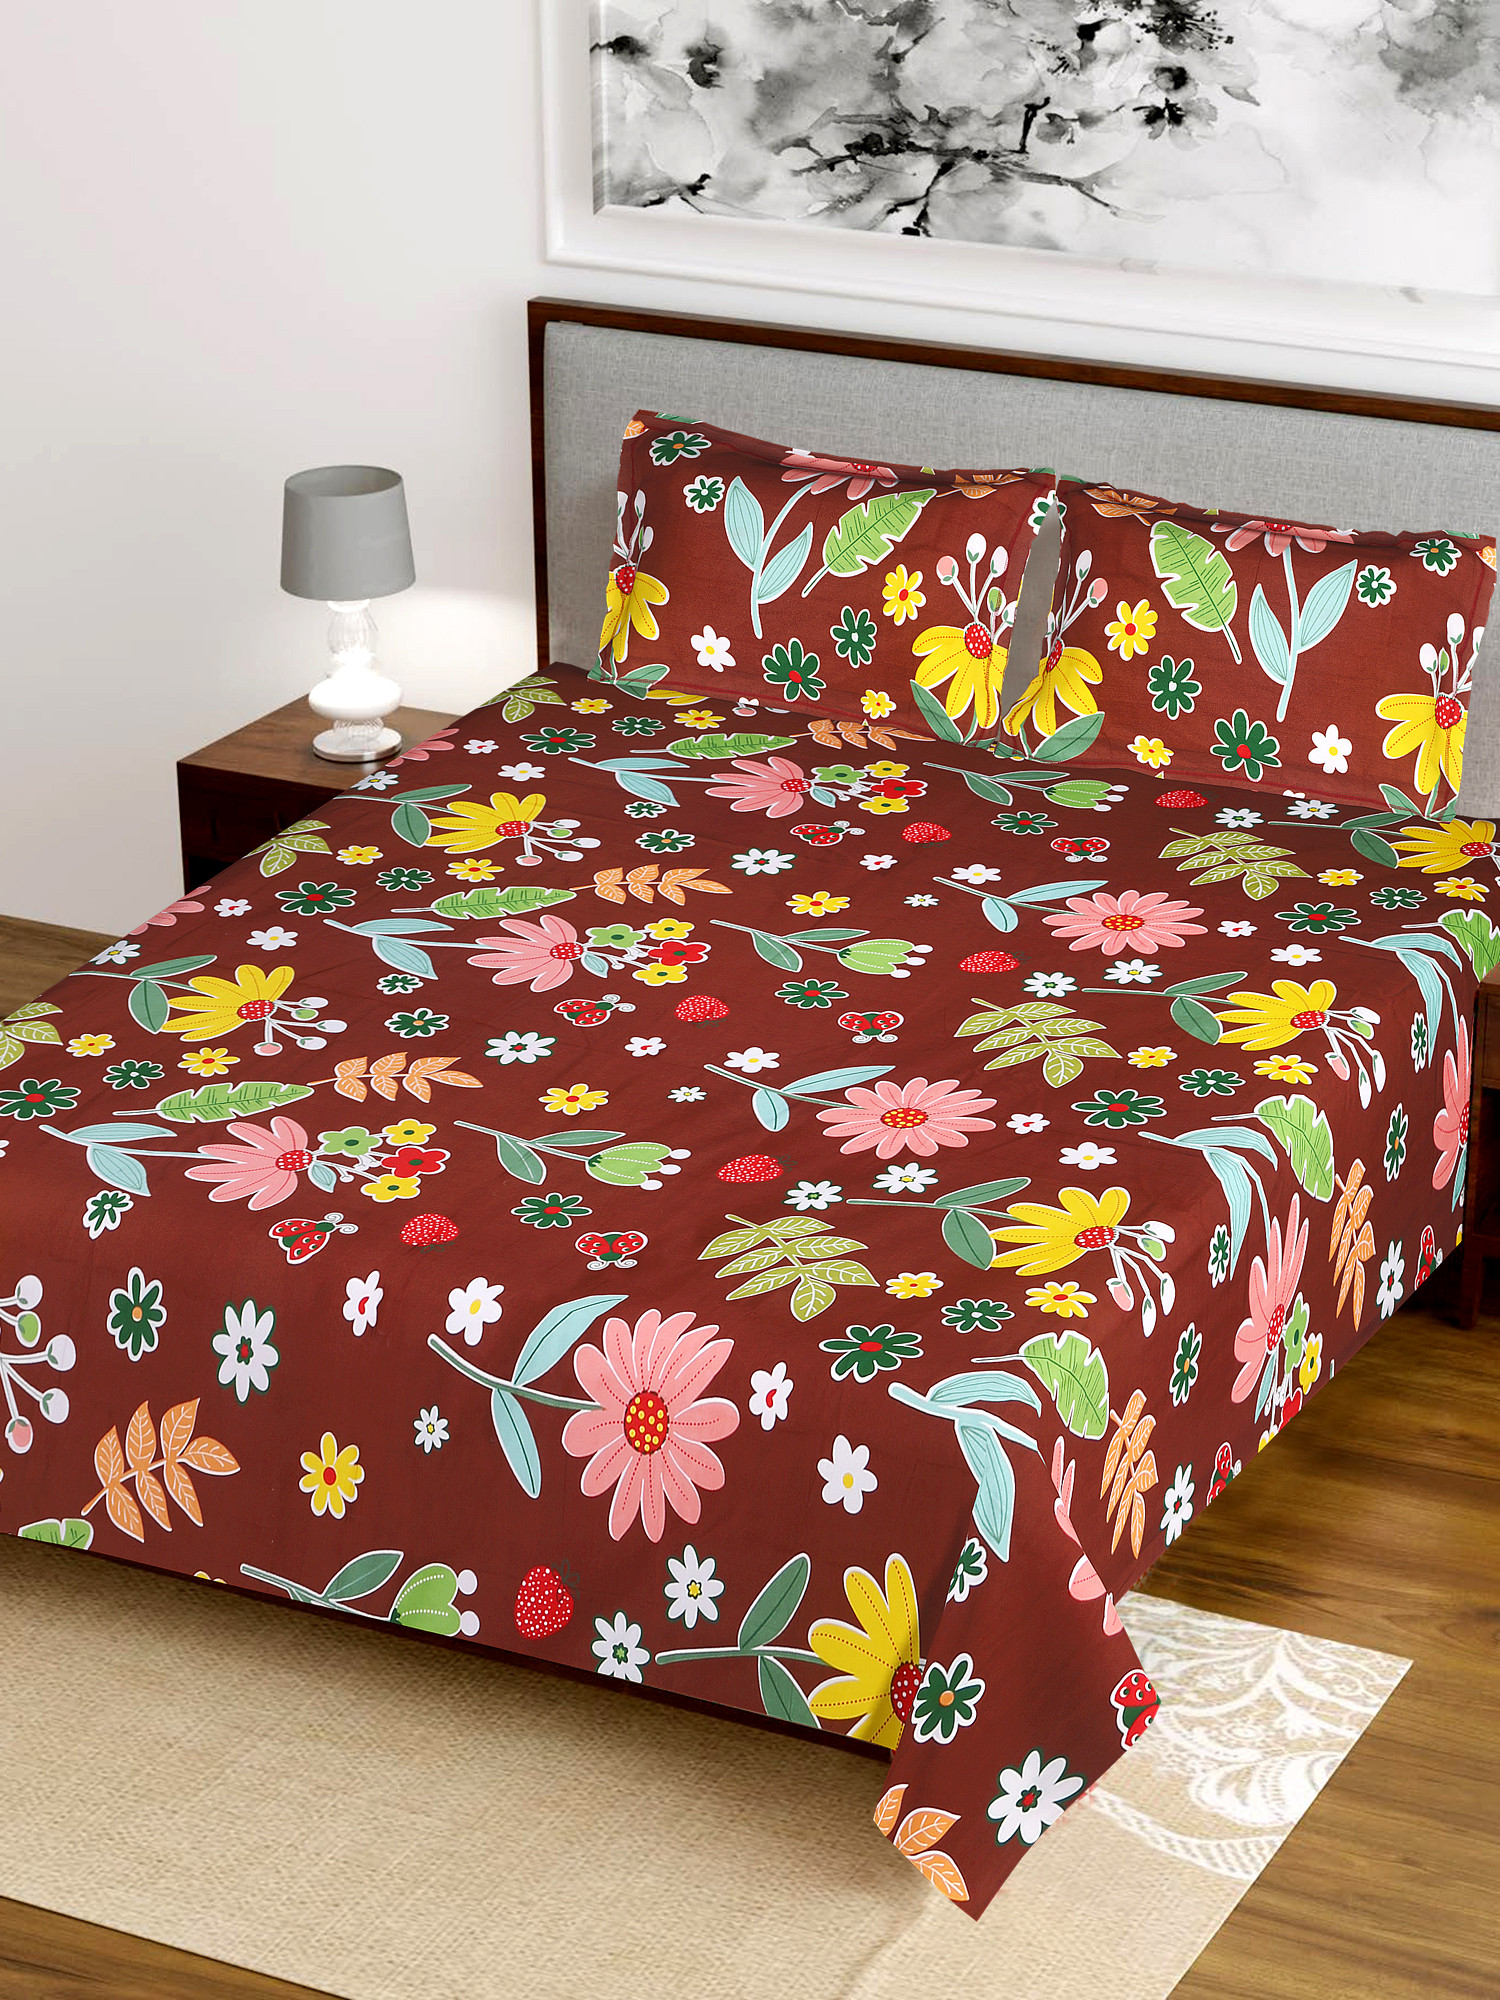 Kuber Industries Flower Printed Luxurious Soft Breathable & Comfortable Cotton Double Bedsheet With 2 Pillow Covers (Walnut)-HS43KUBMART26827